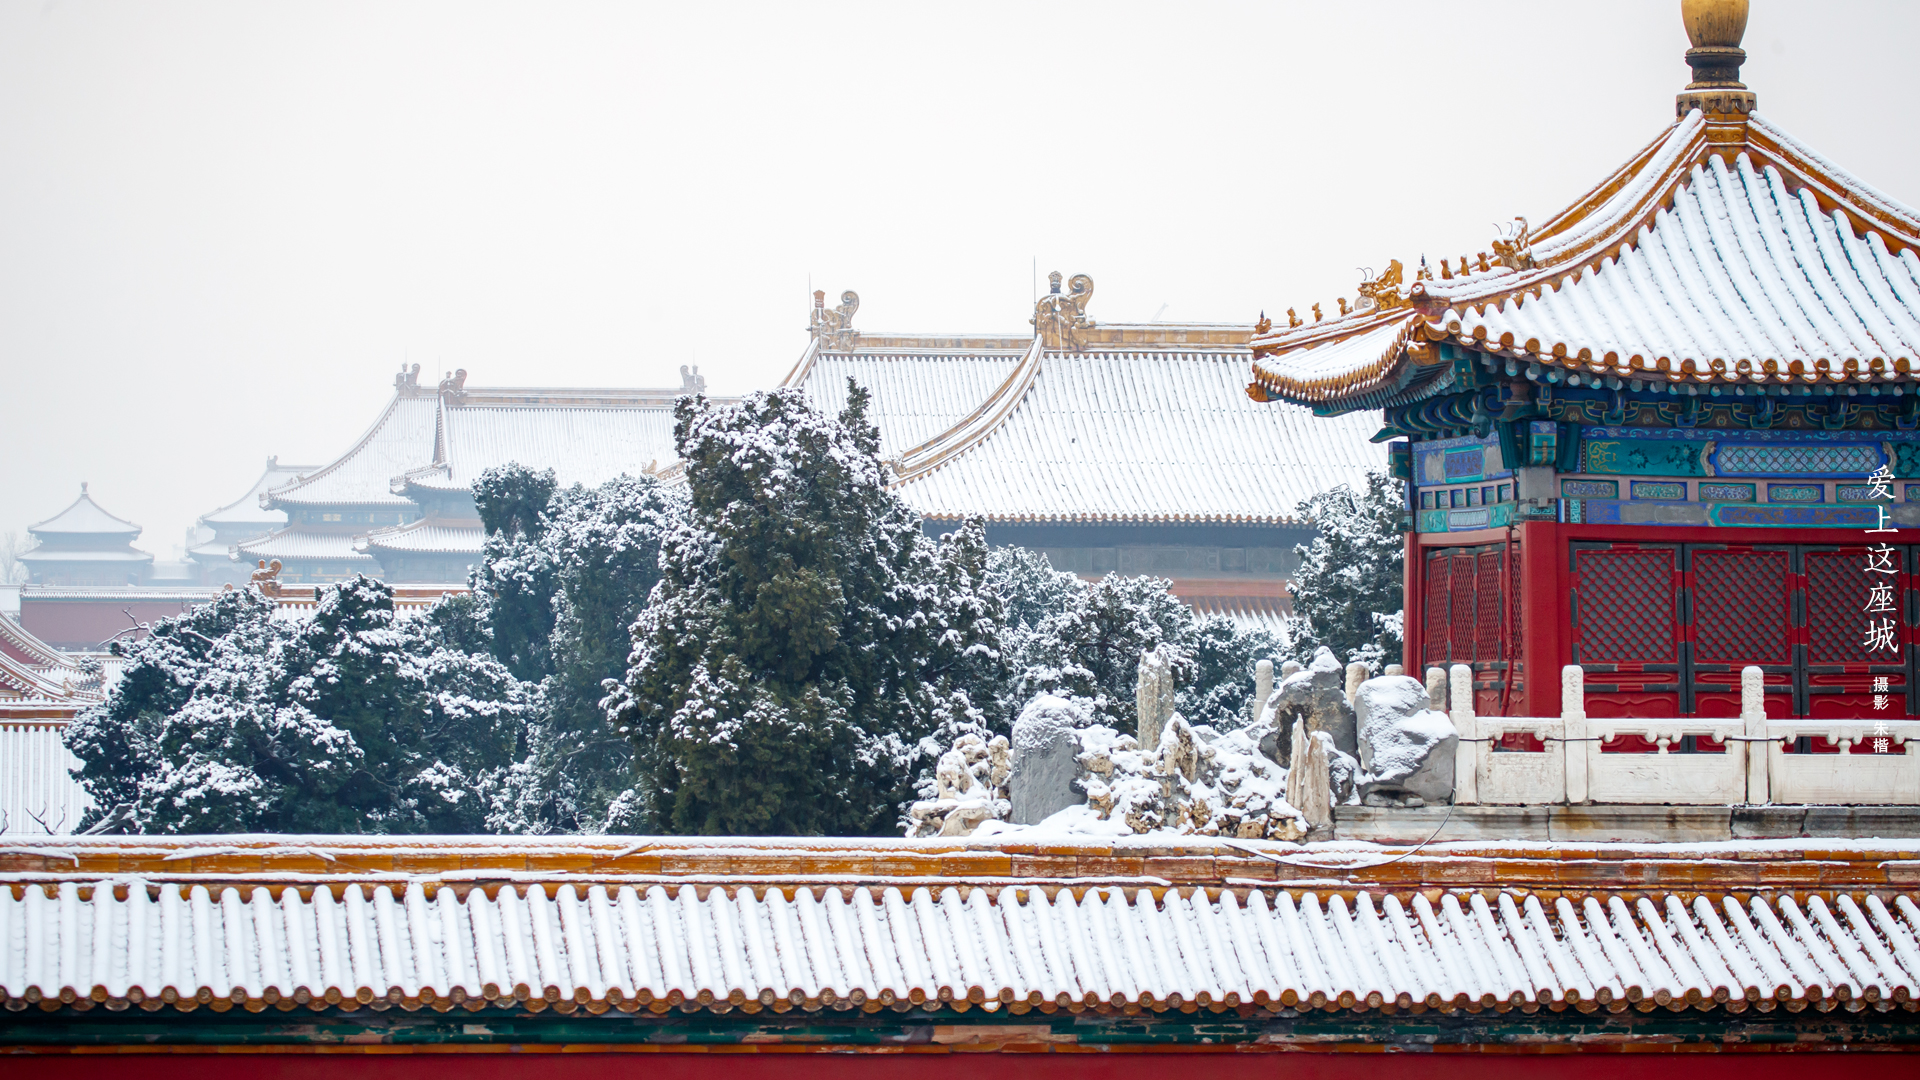 General 1920x1080 Forbidden City snow palace Chinese architecture building watermarked